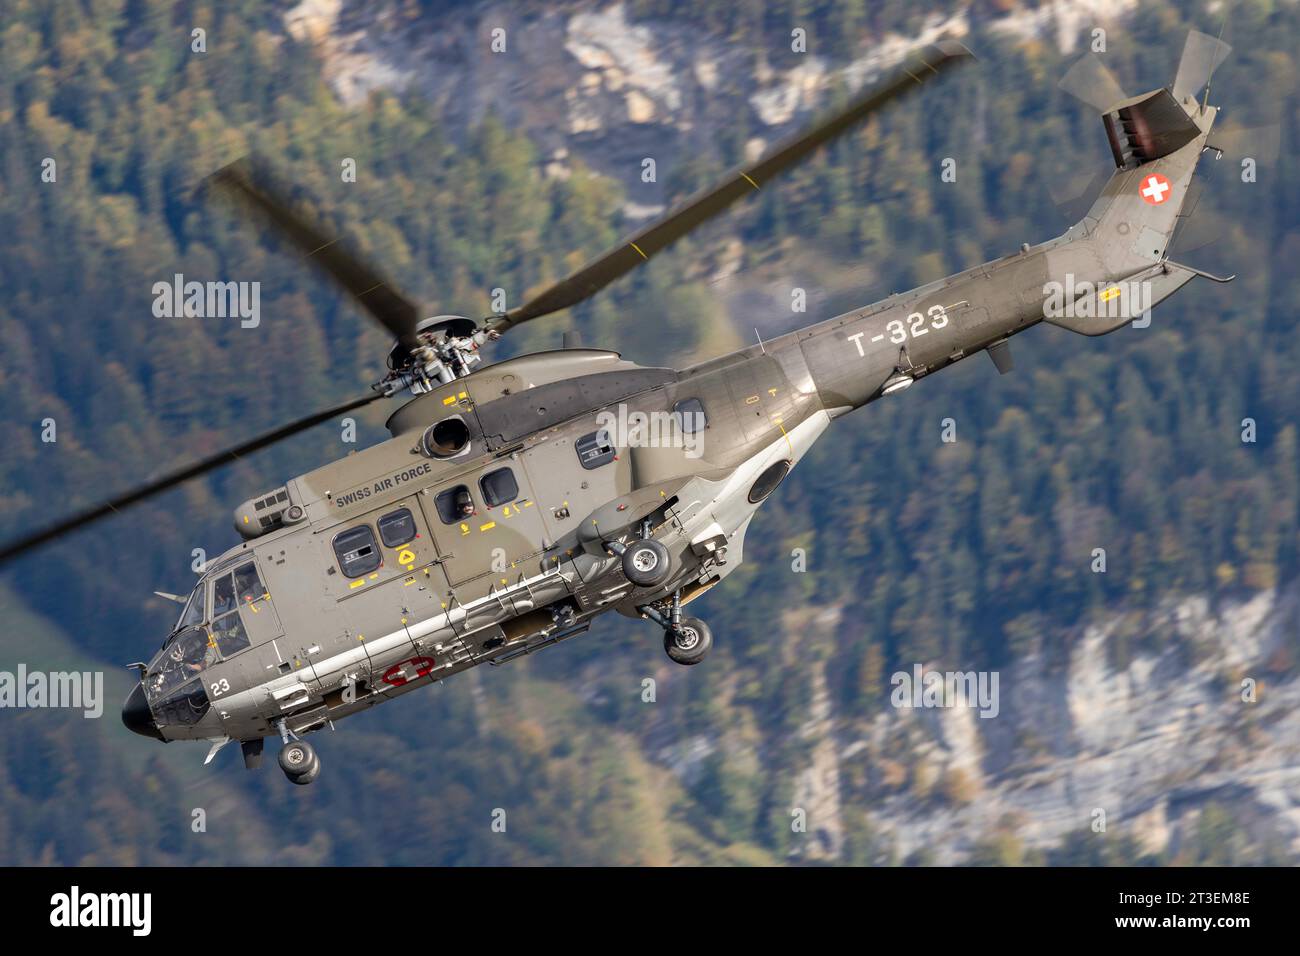 EUROCOPTER AS332 SUPER PUMA T-323 SWISS AIR FORCE Stock Photo